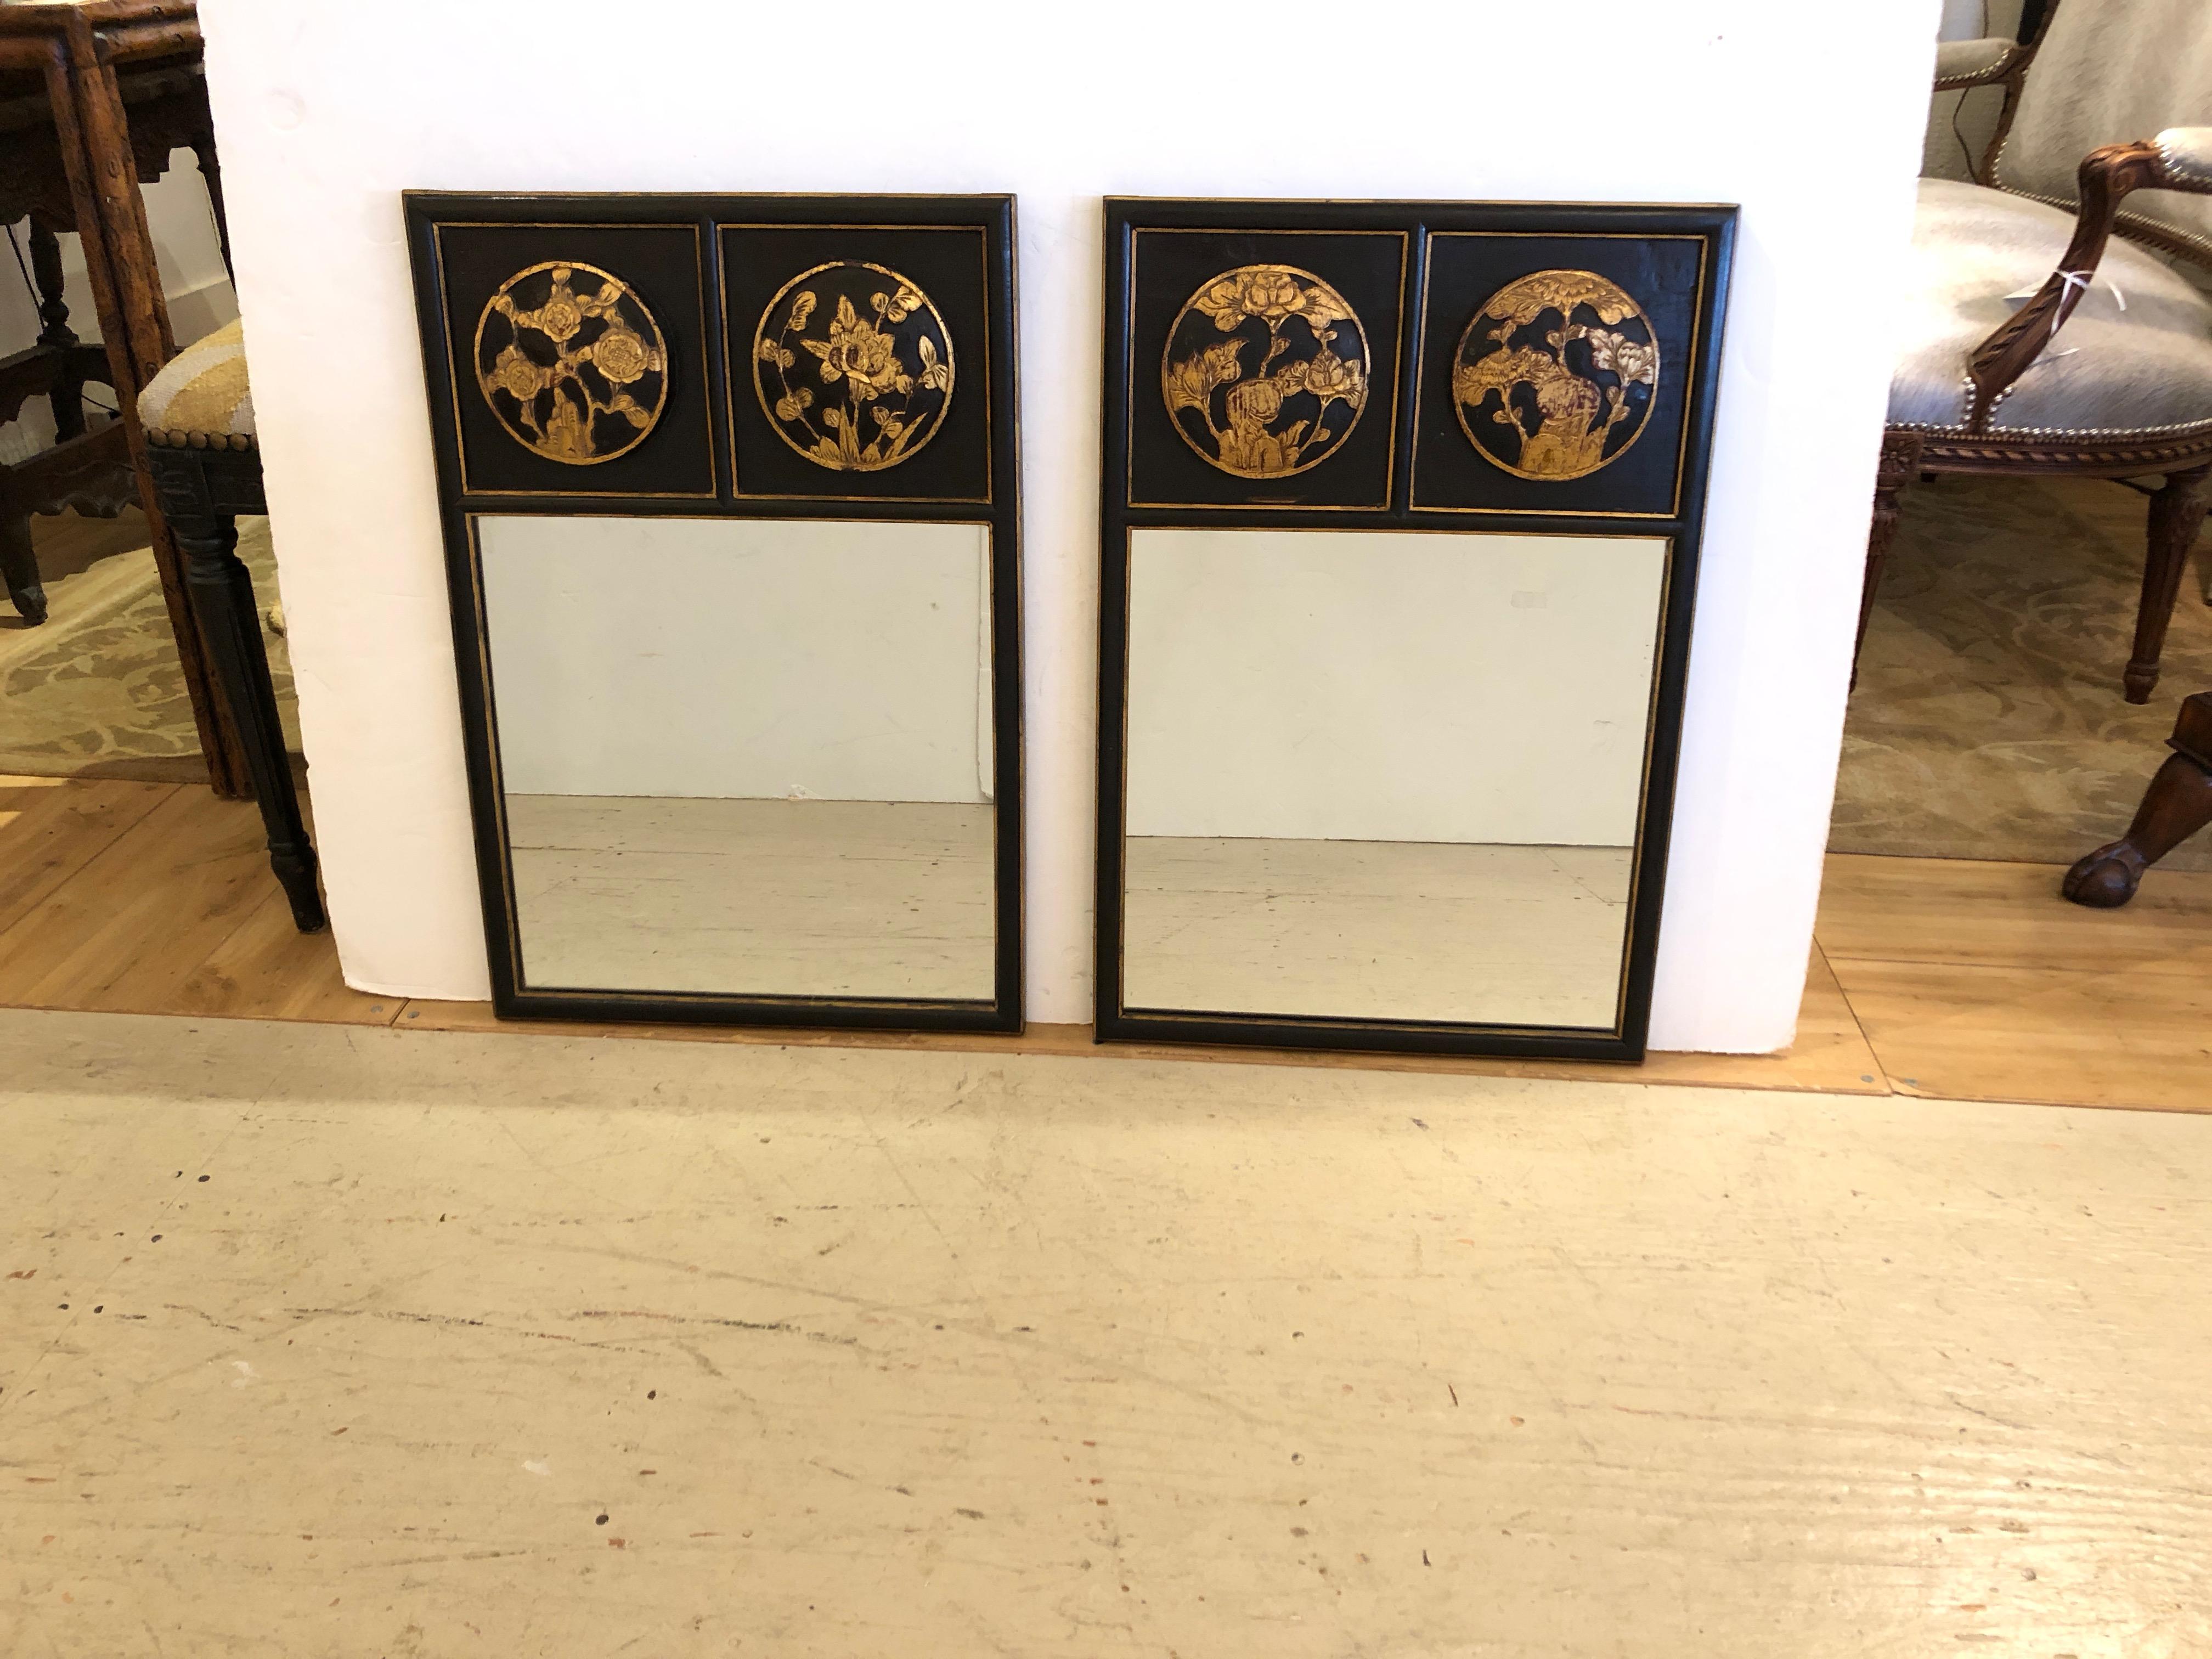 Pair of rich black and gilded Japanese style mirrors having circular decorative medallions at the top, each one unique.
Mirrors measure 15.5 x 15.5.